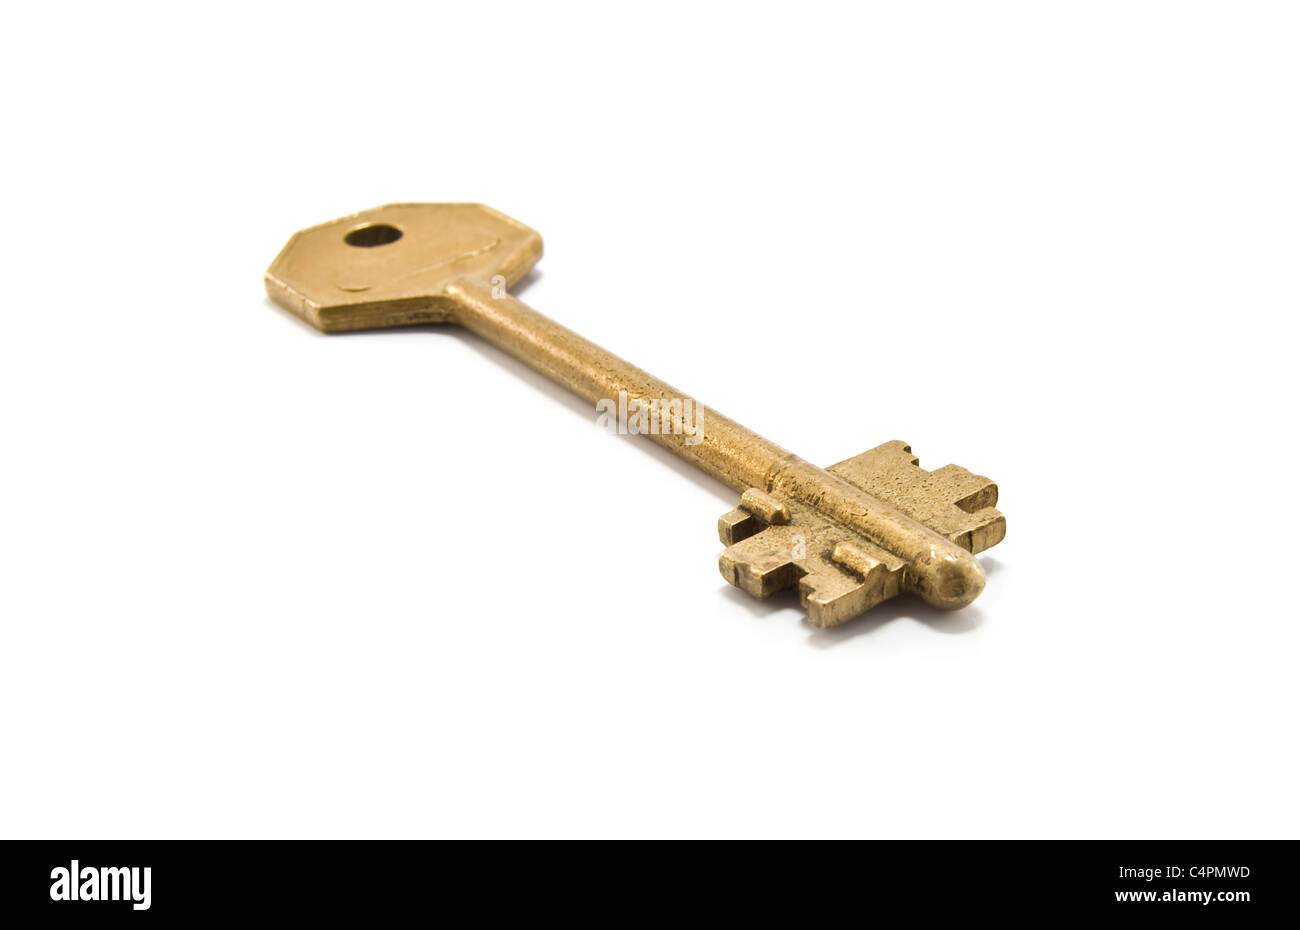 the key is isolated on a white background Stock Photo